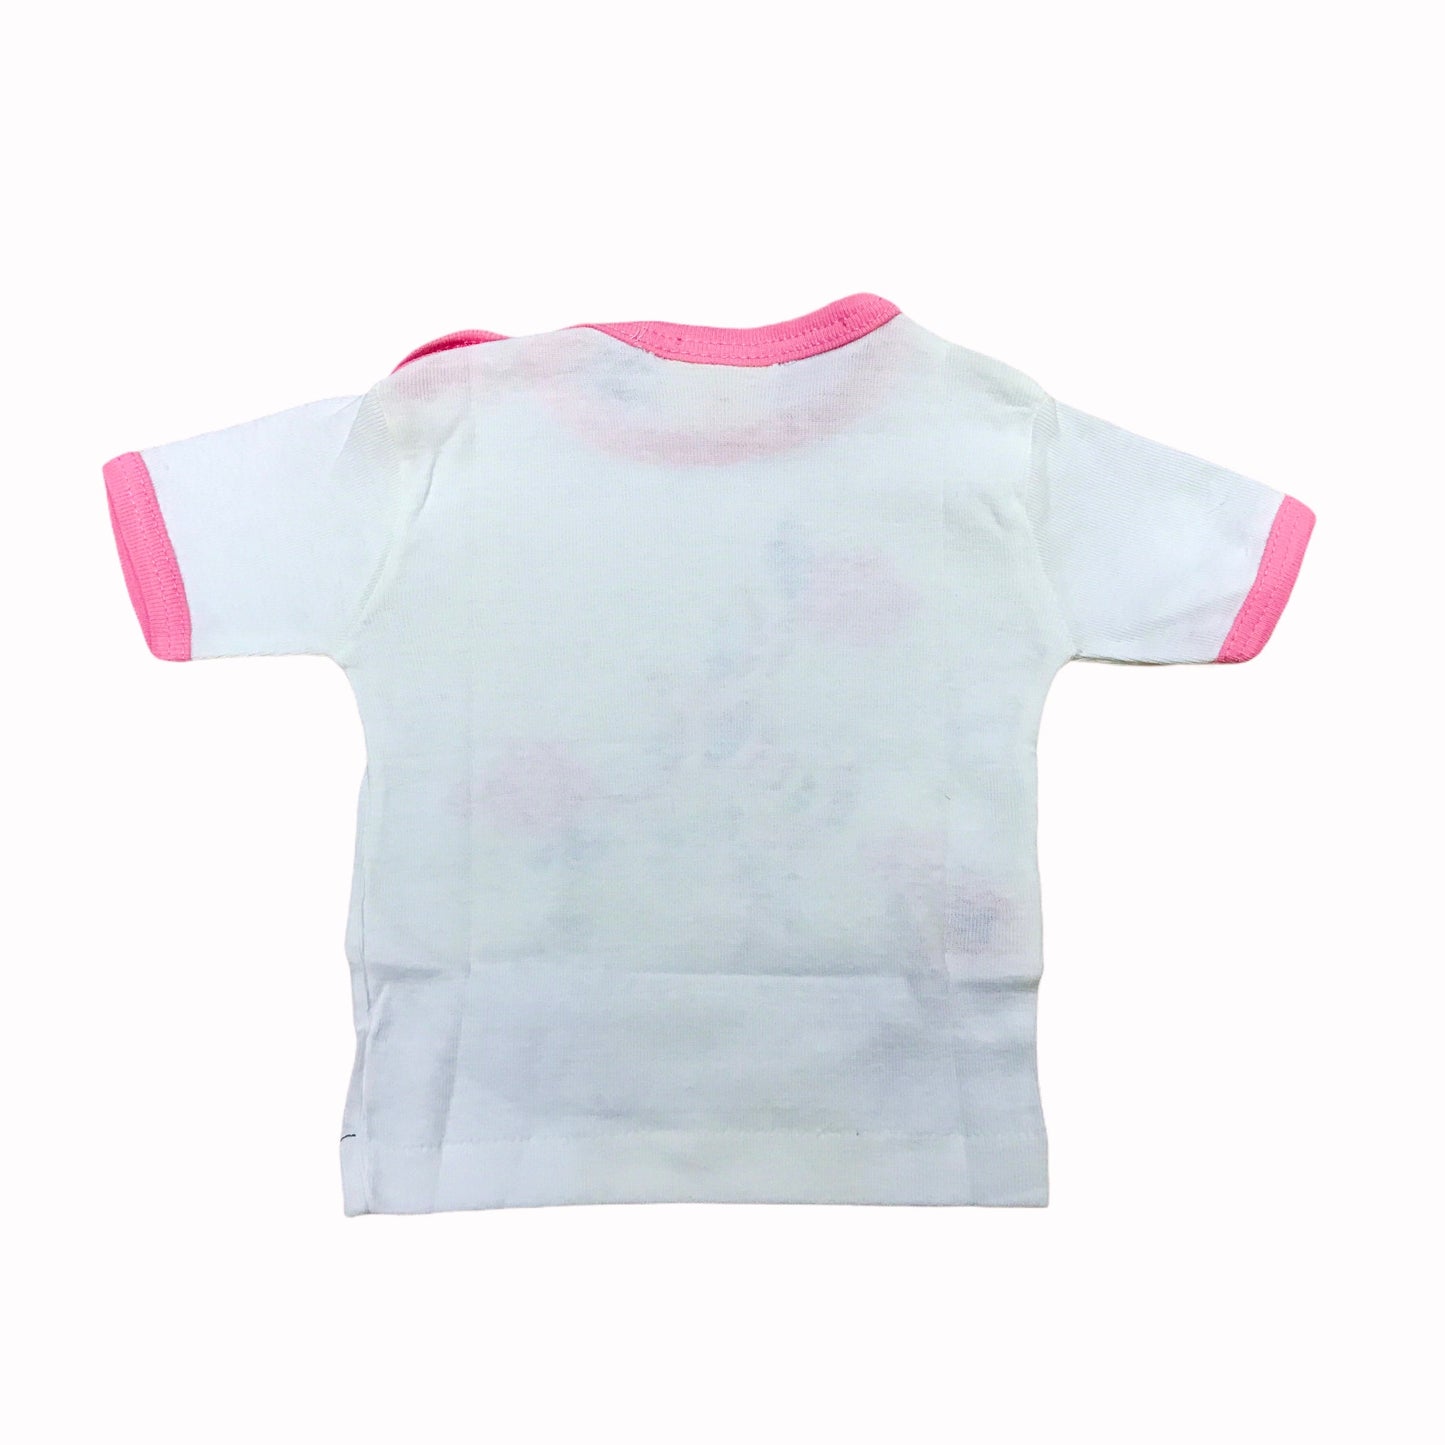 Vintage 70's Pink White Bird Printed  Baby Tee /Top Deadstock  French Made 6-9 Months